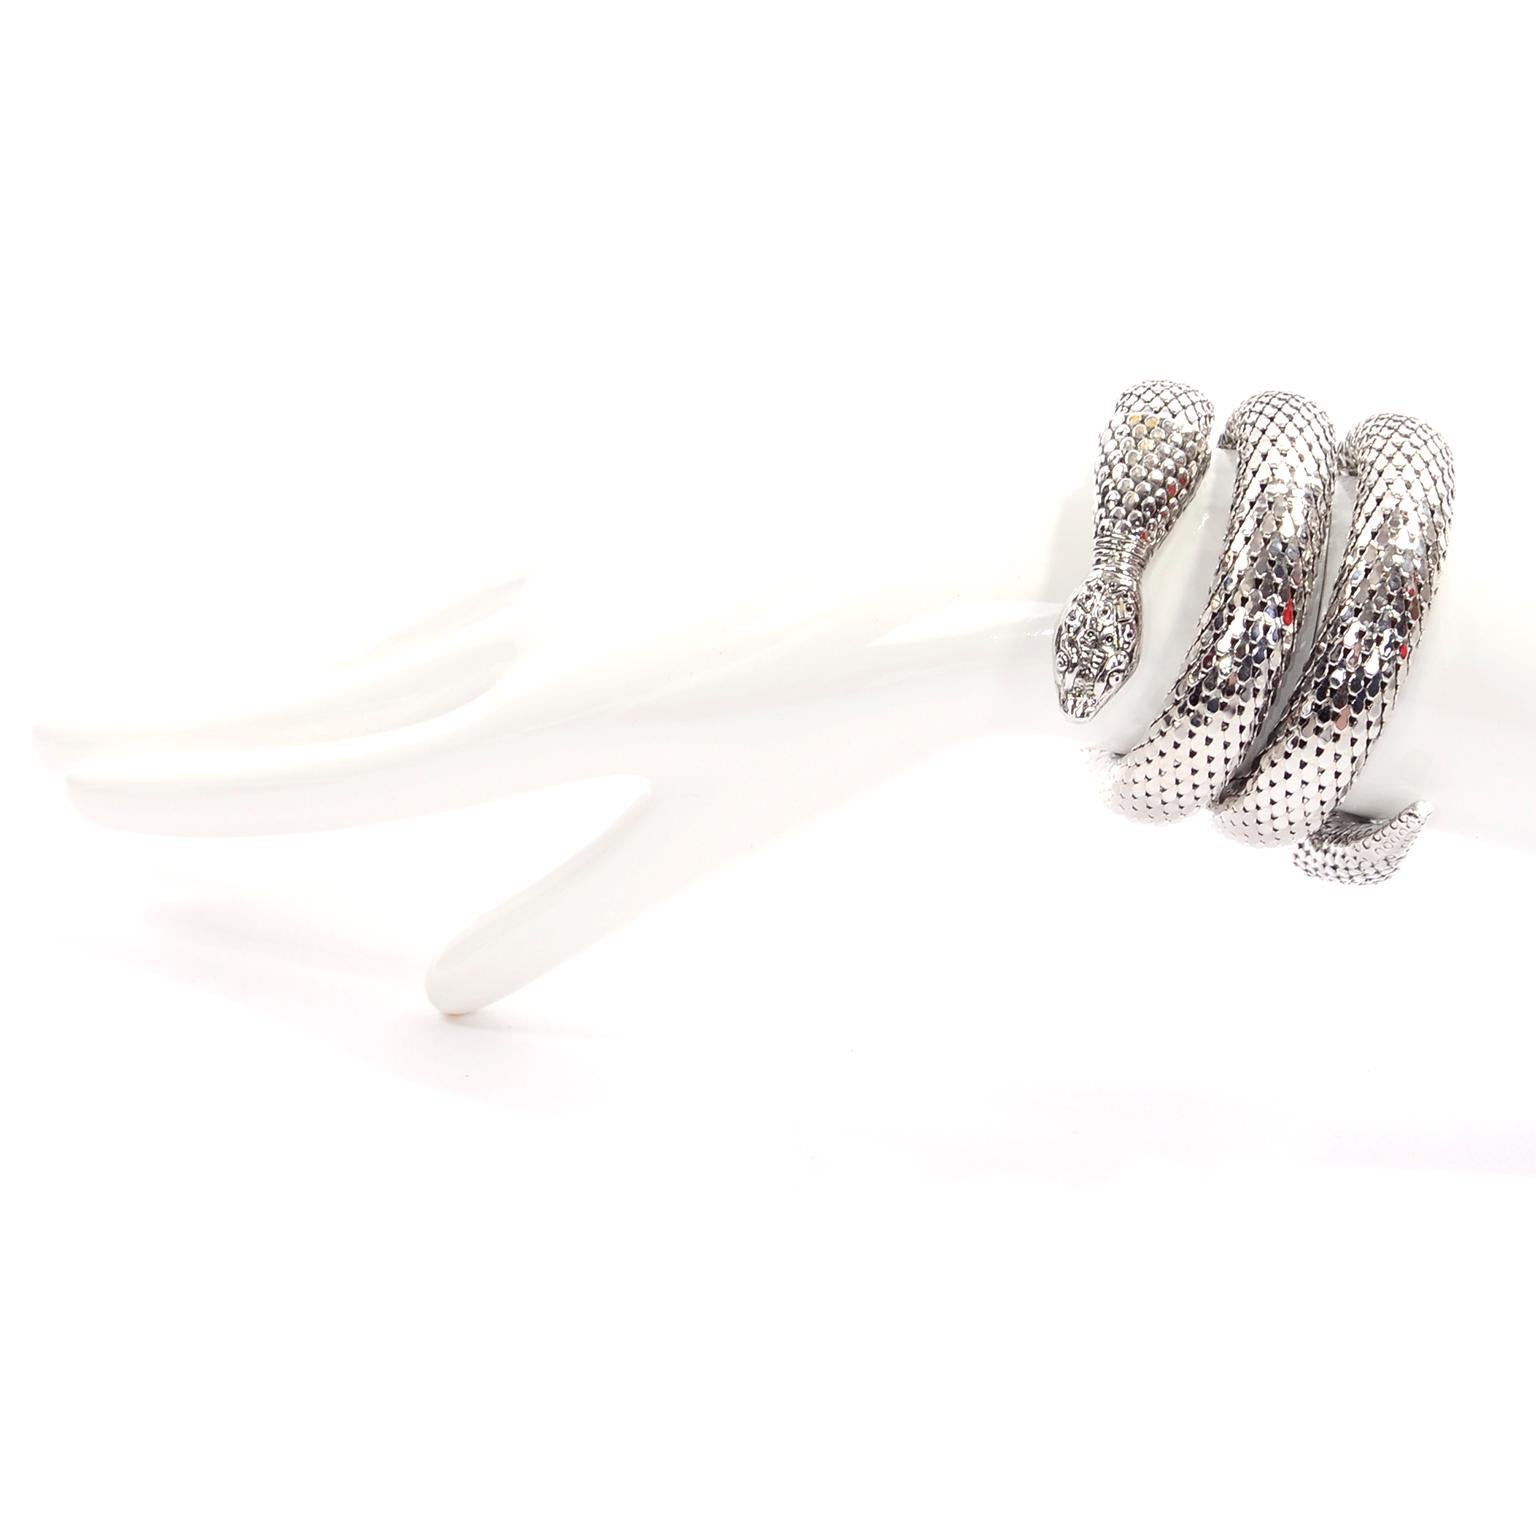 This is an outstanding vintage 1970's Egyptian revival silver mesh snake bracelet from Whiting & Davis.  This coiled snake bracelet was made by the masters of mesh, who were first known for their incredible mesh handbags.  We also have the same